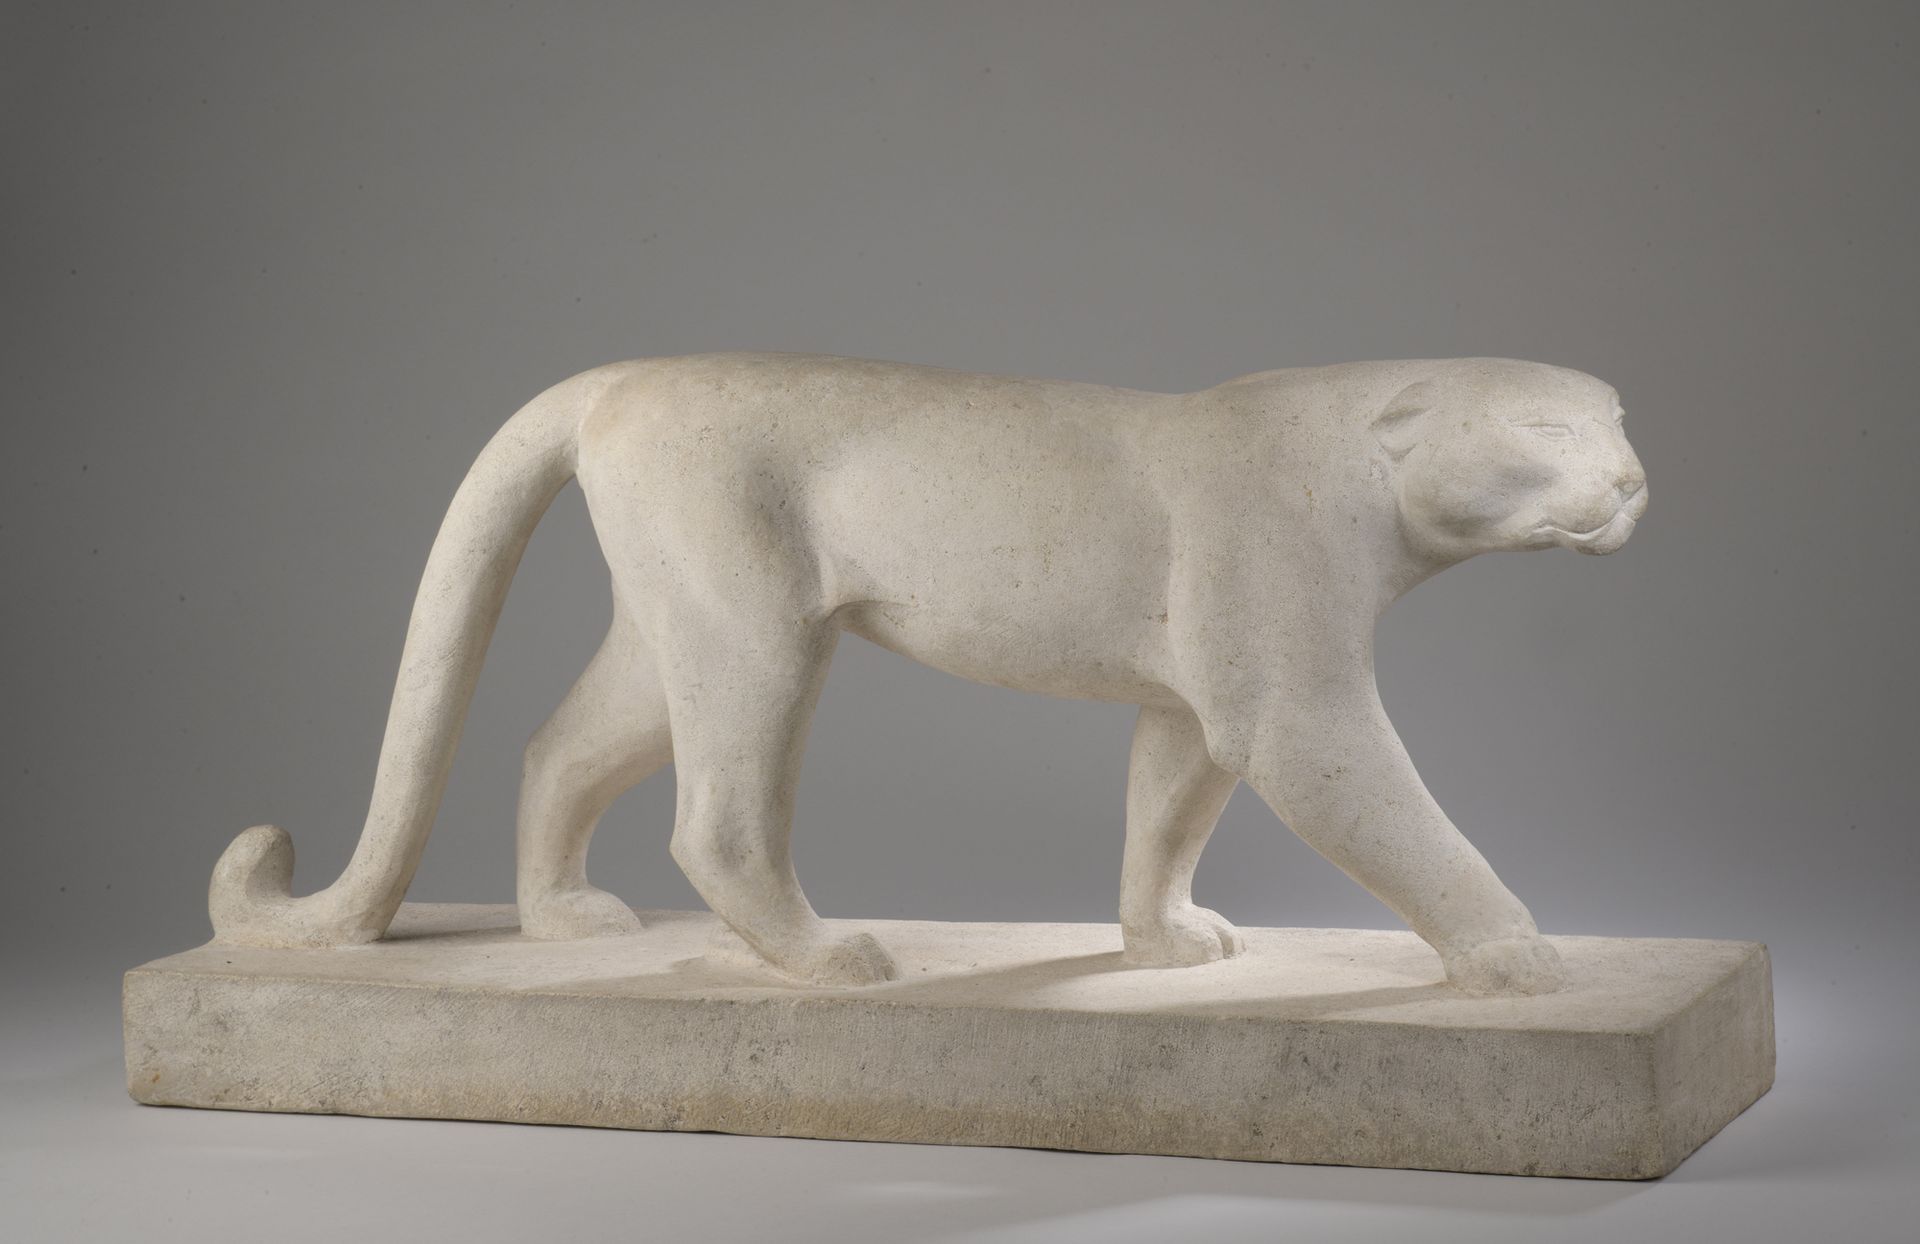 Null FRENCH SCHOOL early 20th century

Panther

Stone.

31,5 x 66 x 17,5 cm